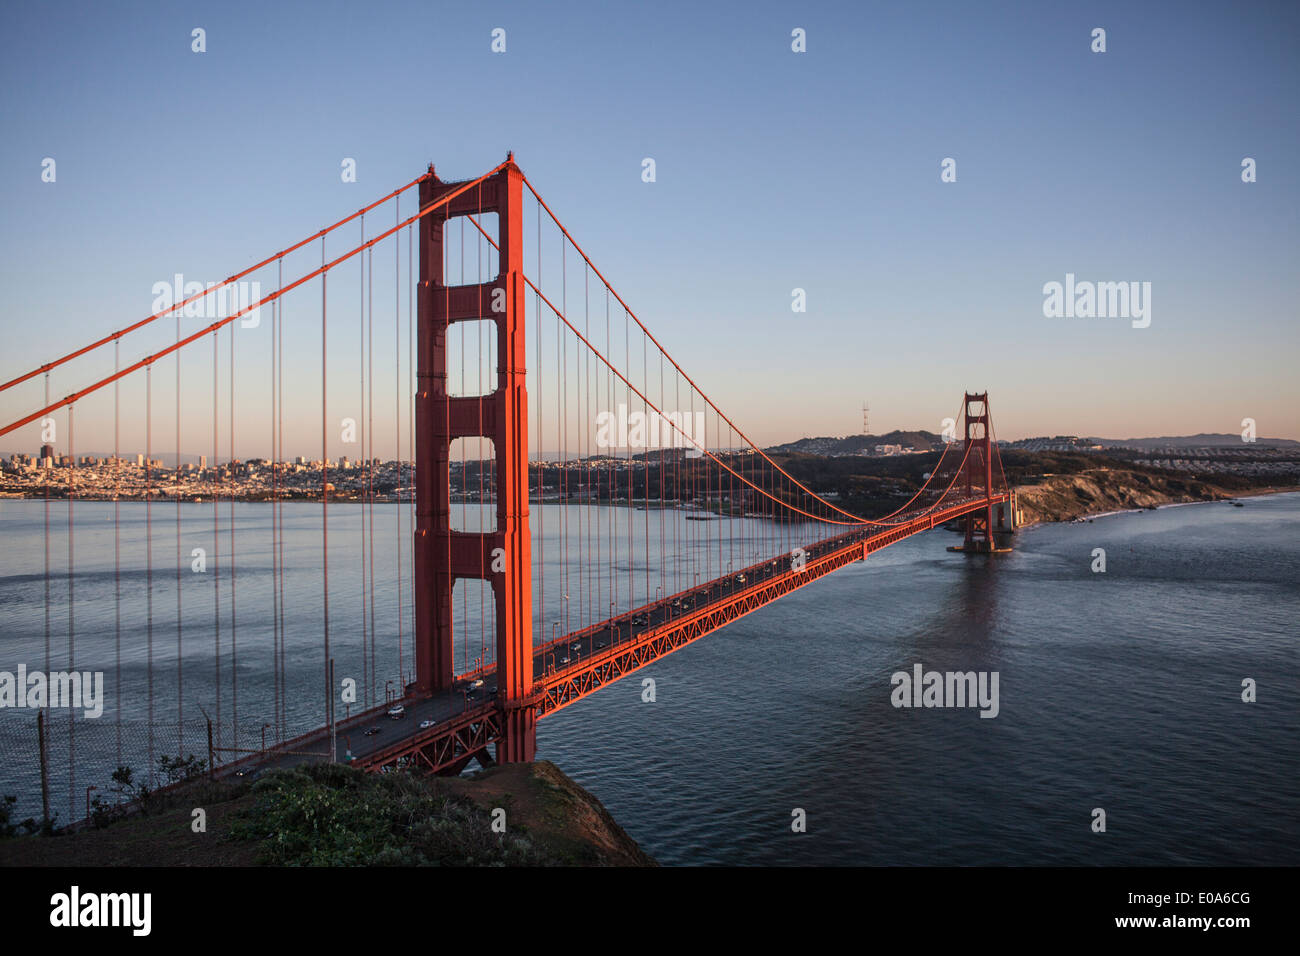 Elevated view of the golden gate bridge, San Francisco, USA Stock Photo